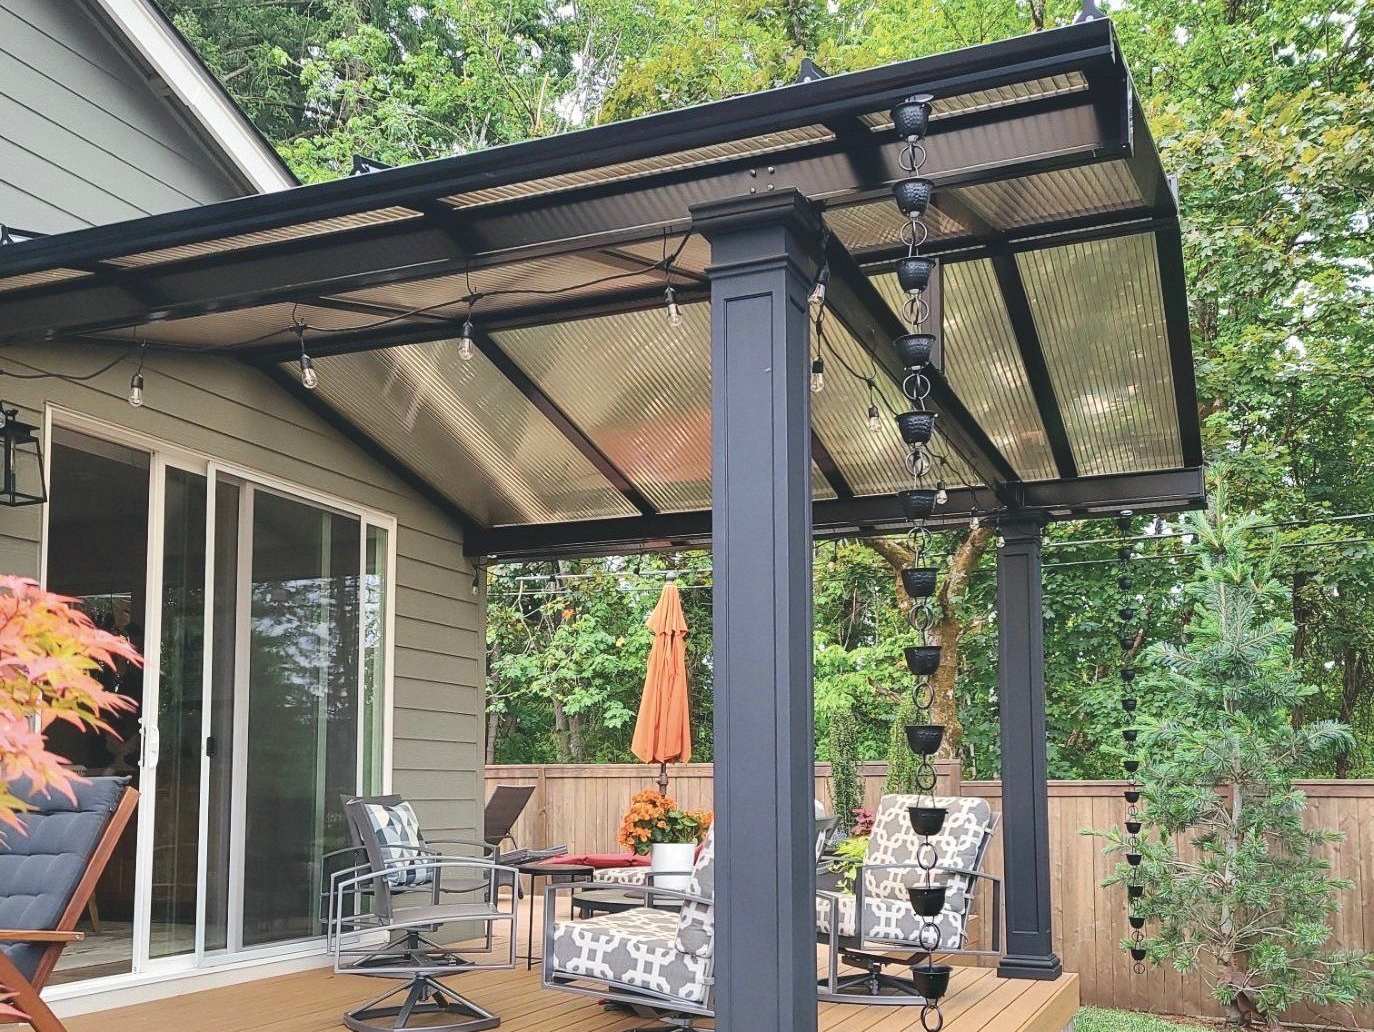 Patio Covers in Gresham Oregon - Gable Roof with ACRYLITE Acrylic